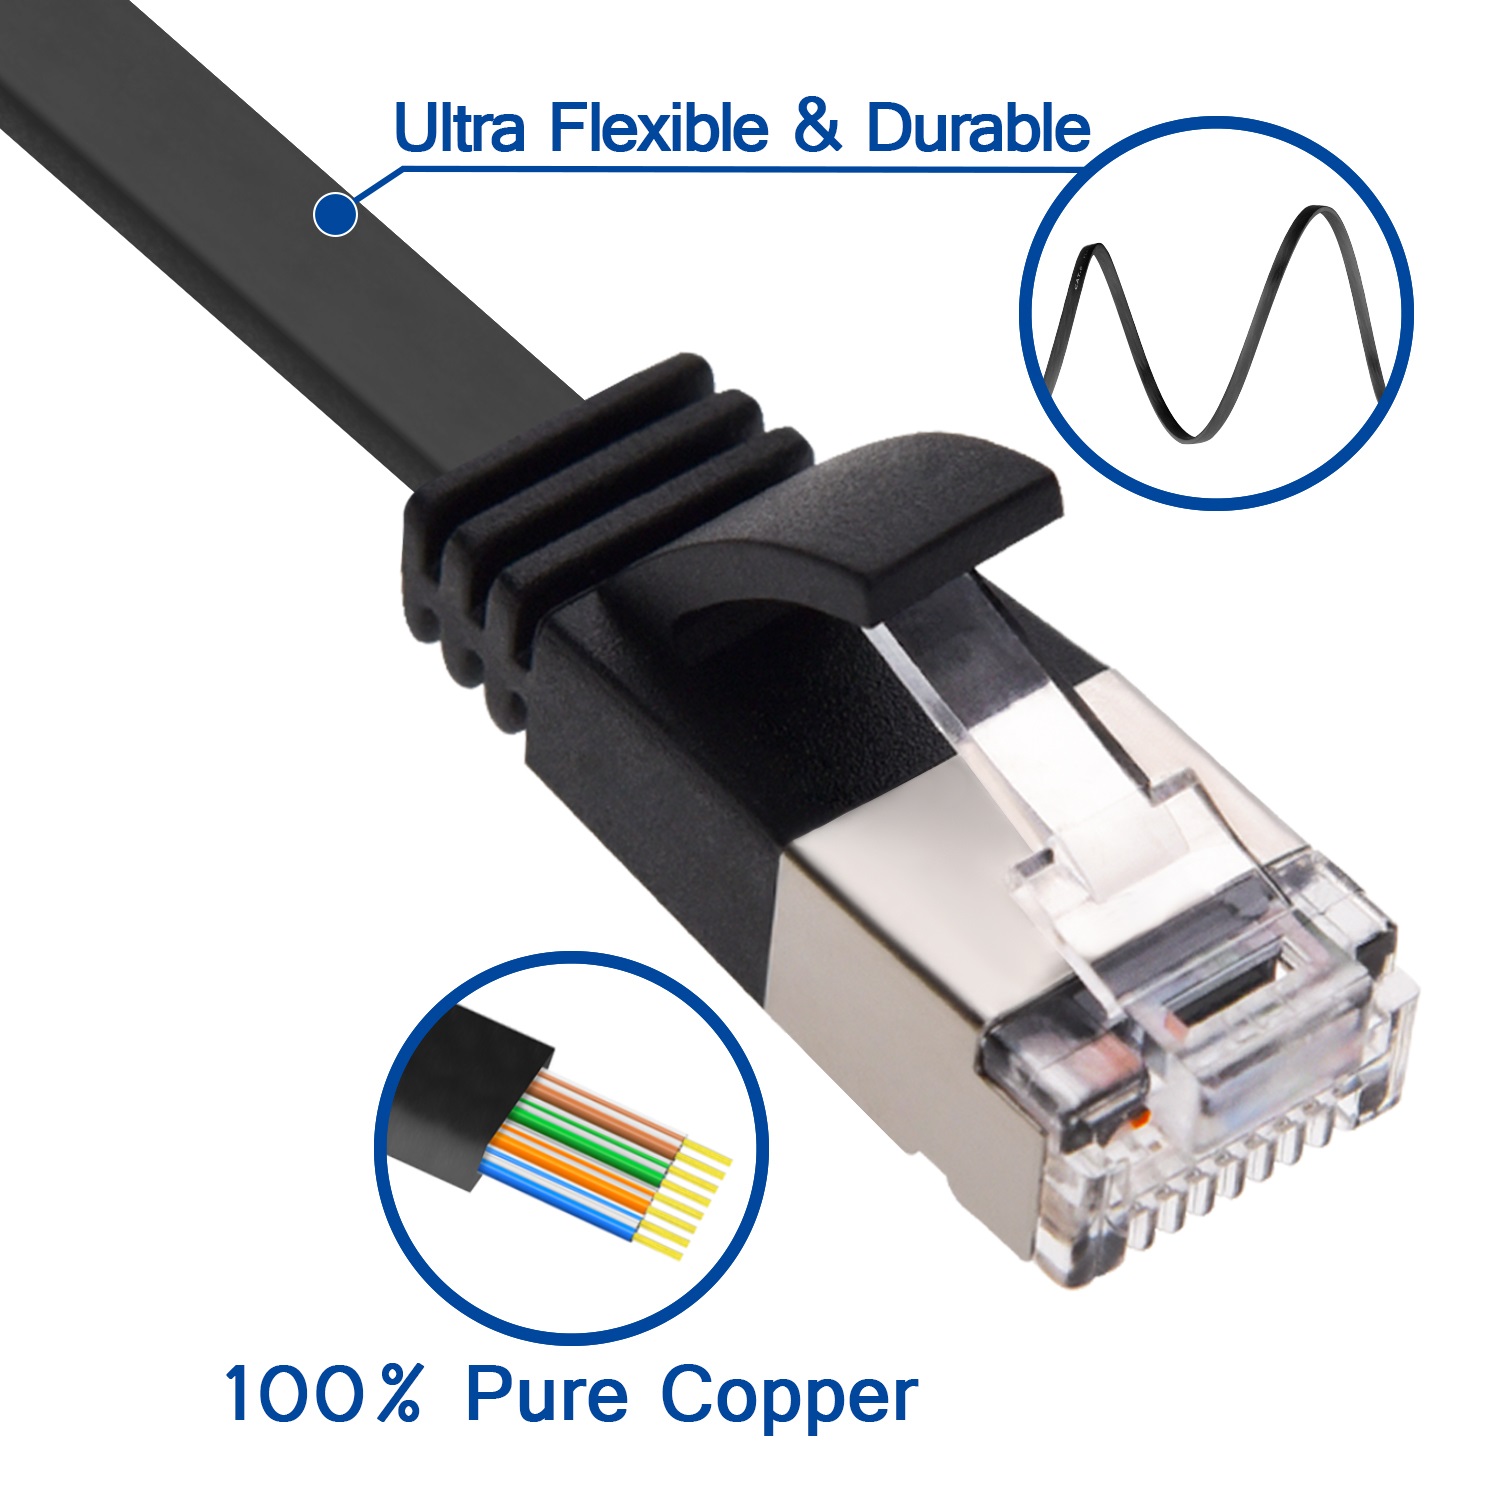 Ultra-flexible Cat 6A cable for mission-critical applications